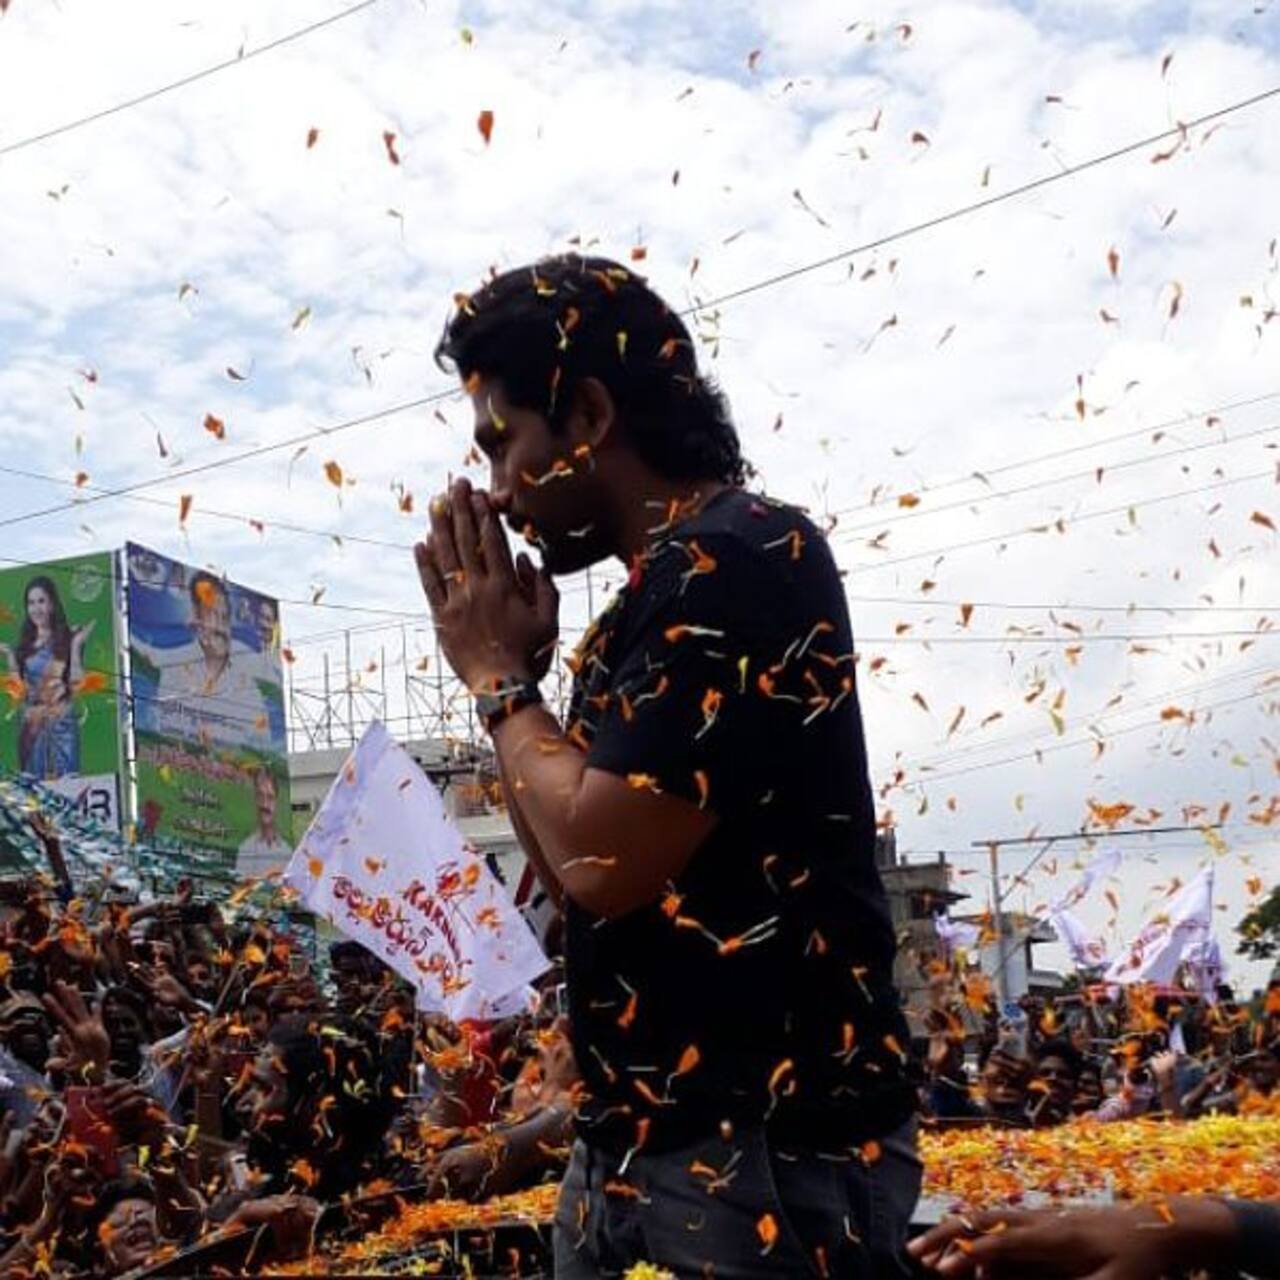 Allu Arjun gets a resounding welcome from fans as he visits Kakinada